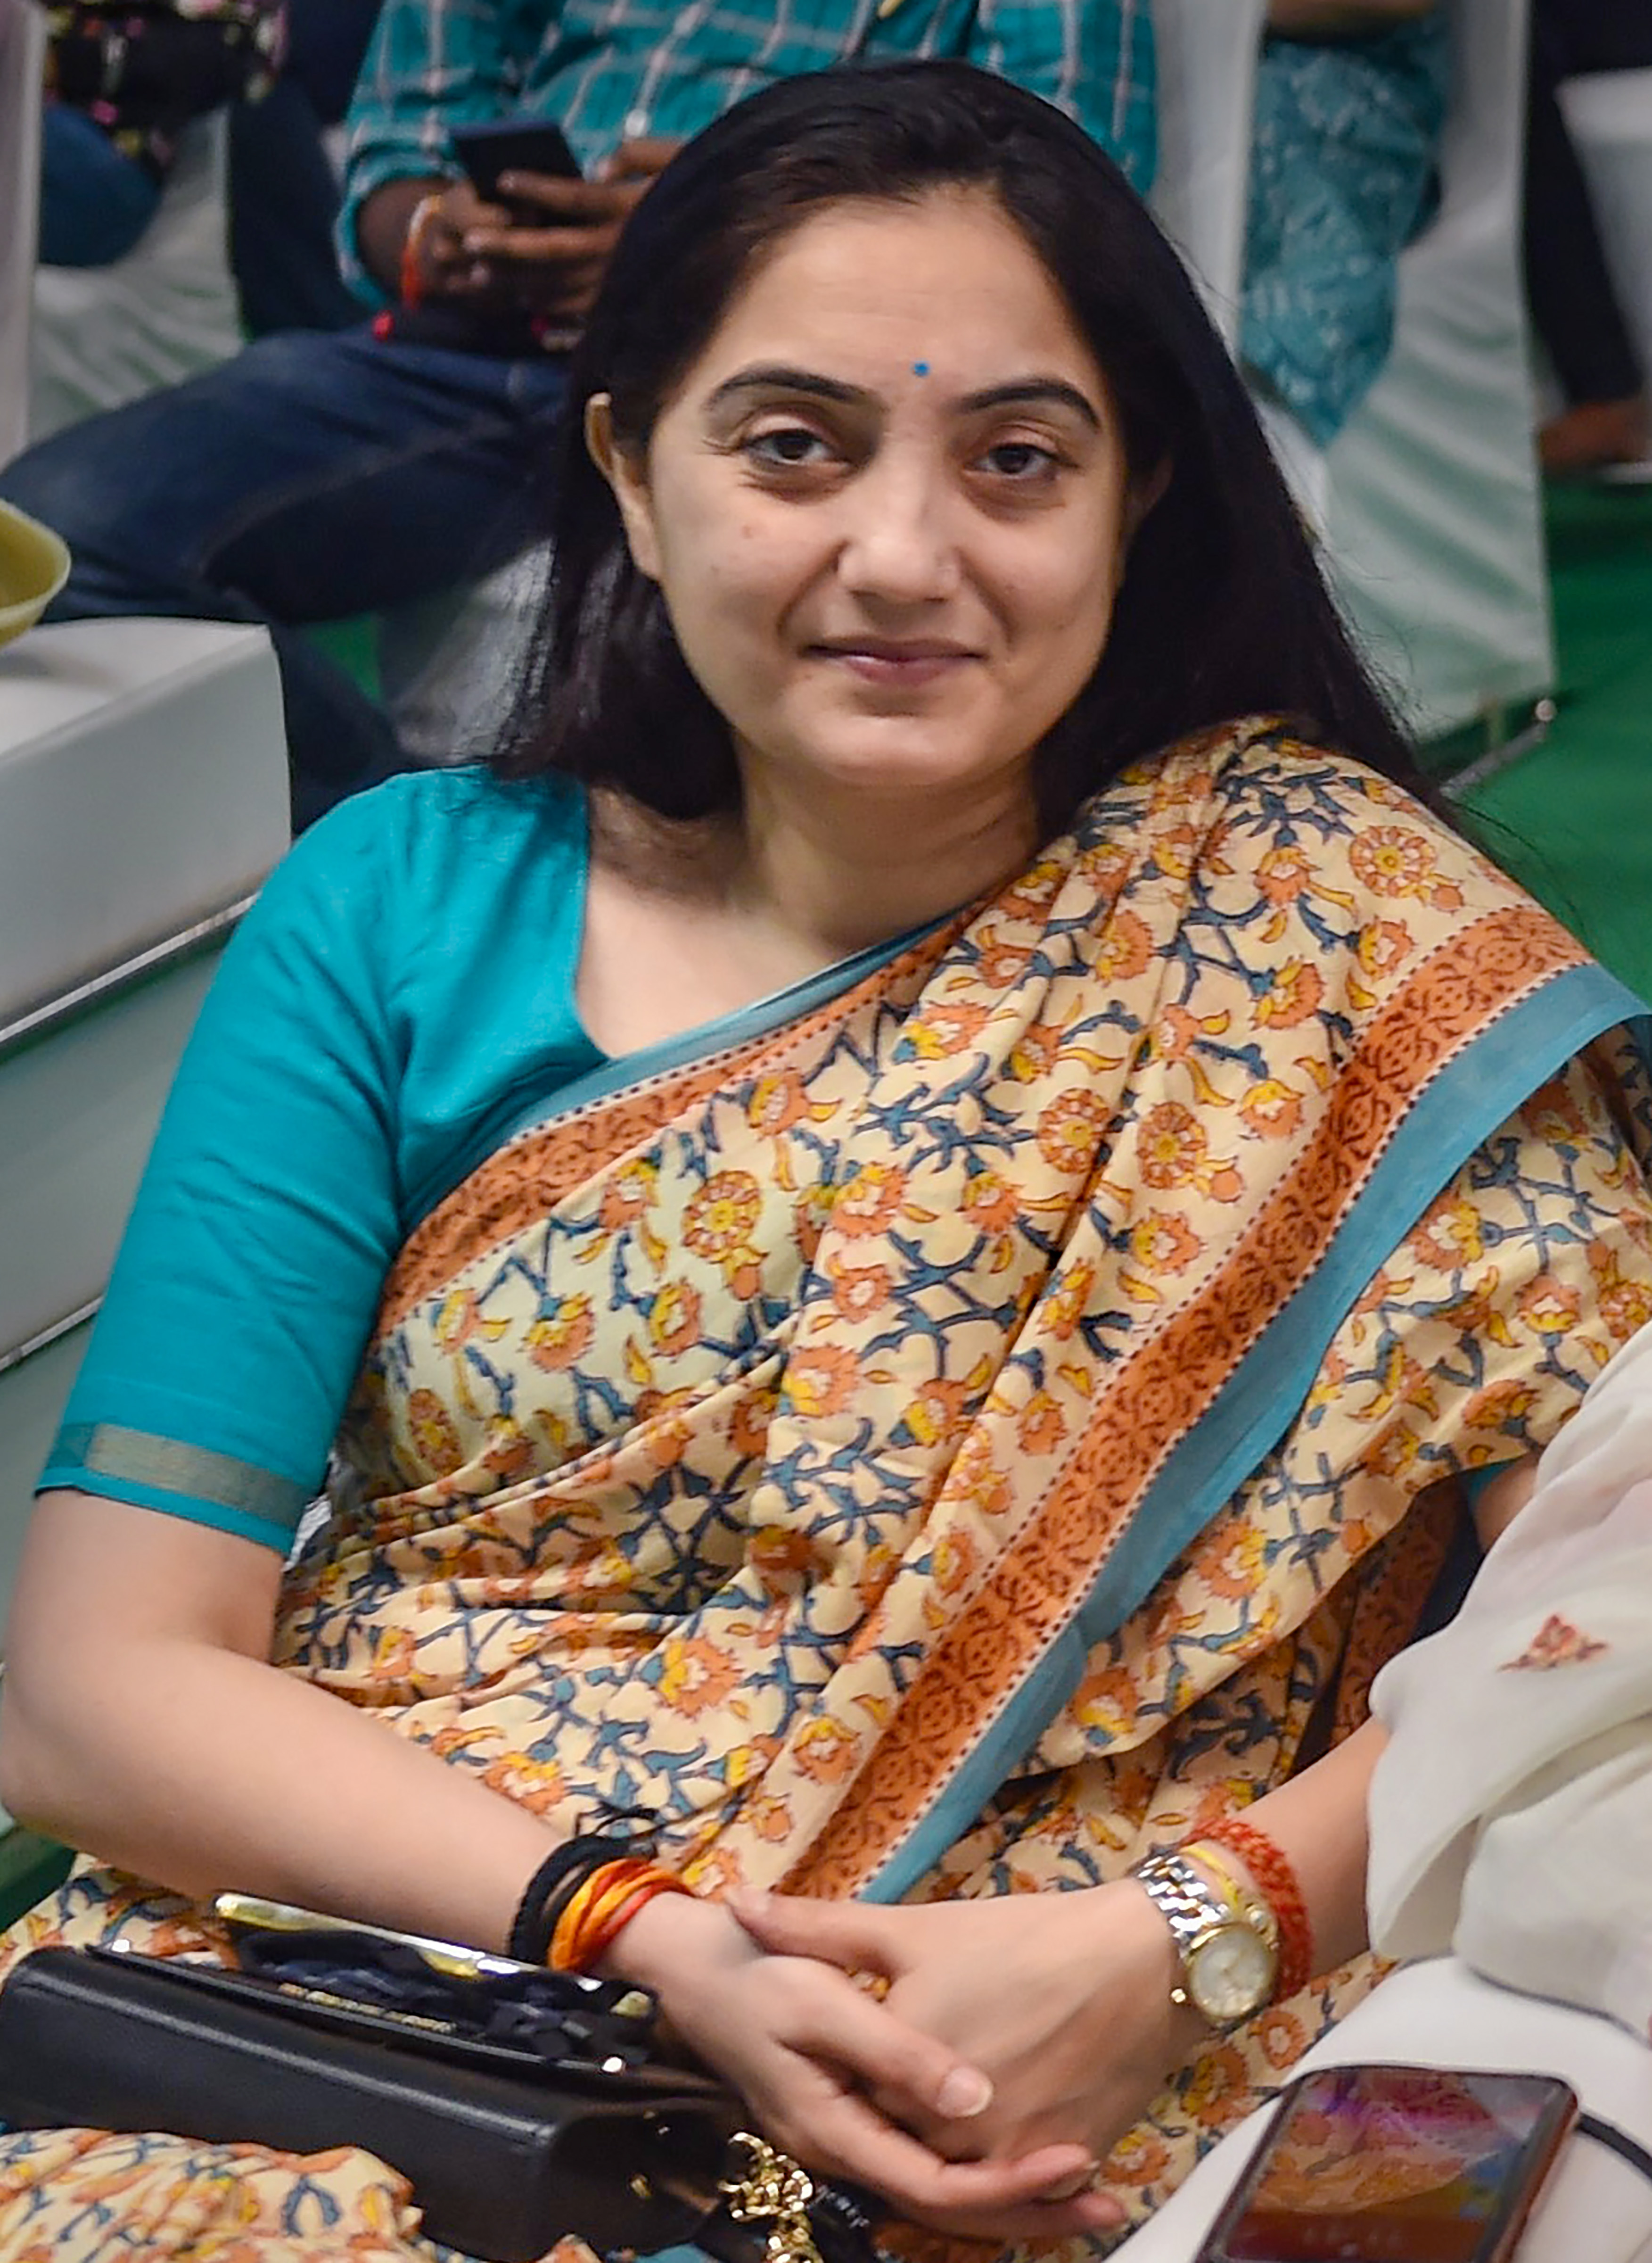 Who is Nupur Sharma? From contesting elections against Arvind Kejriwal to becoming BJP's top spokesperson, here are details about her